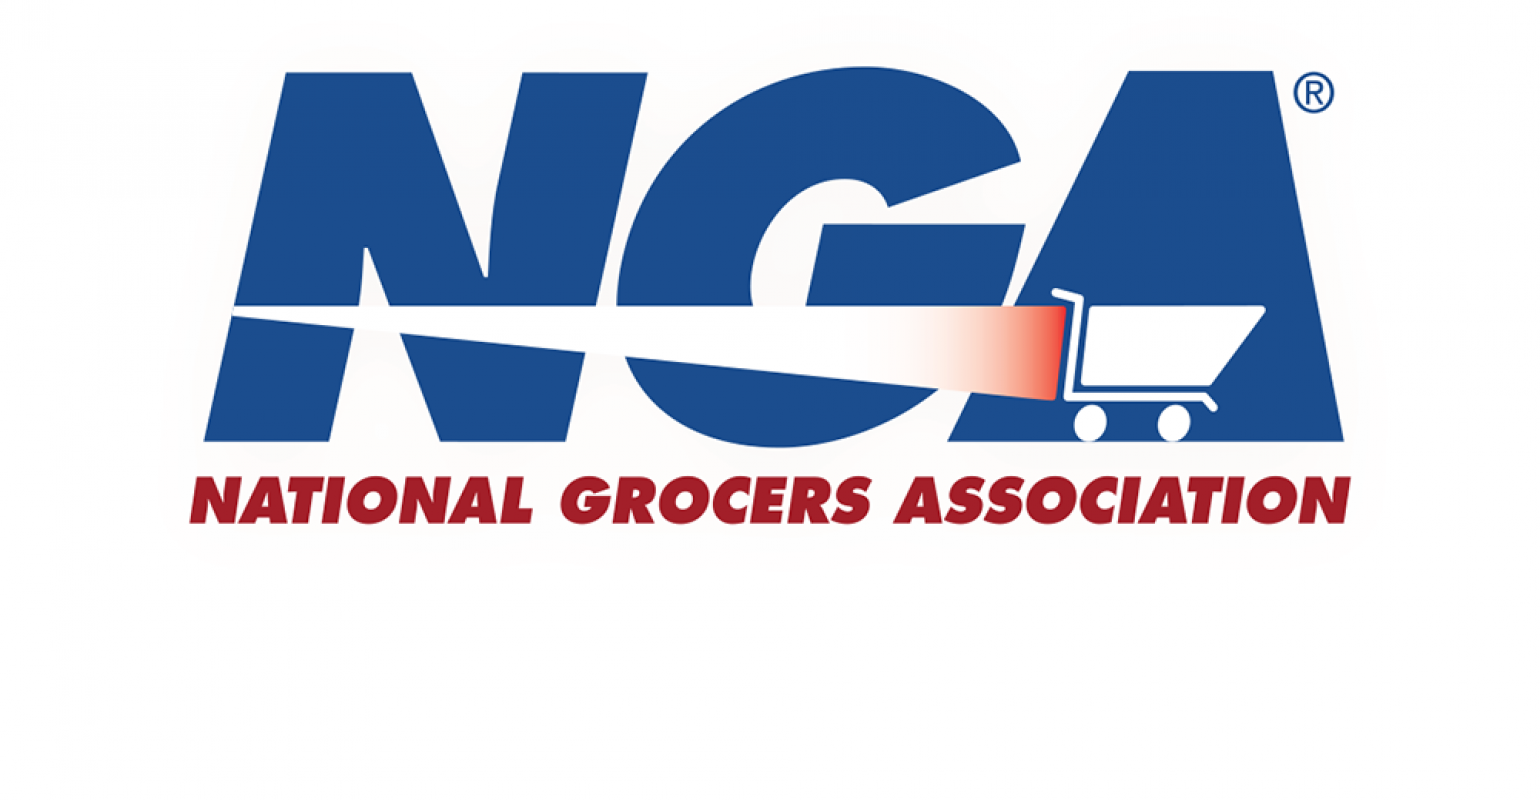 NGA reschedules inperson show for 2021, adds new events Supermarket News